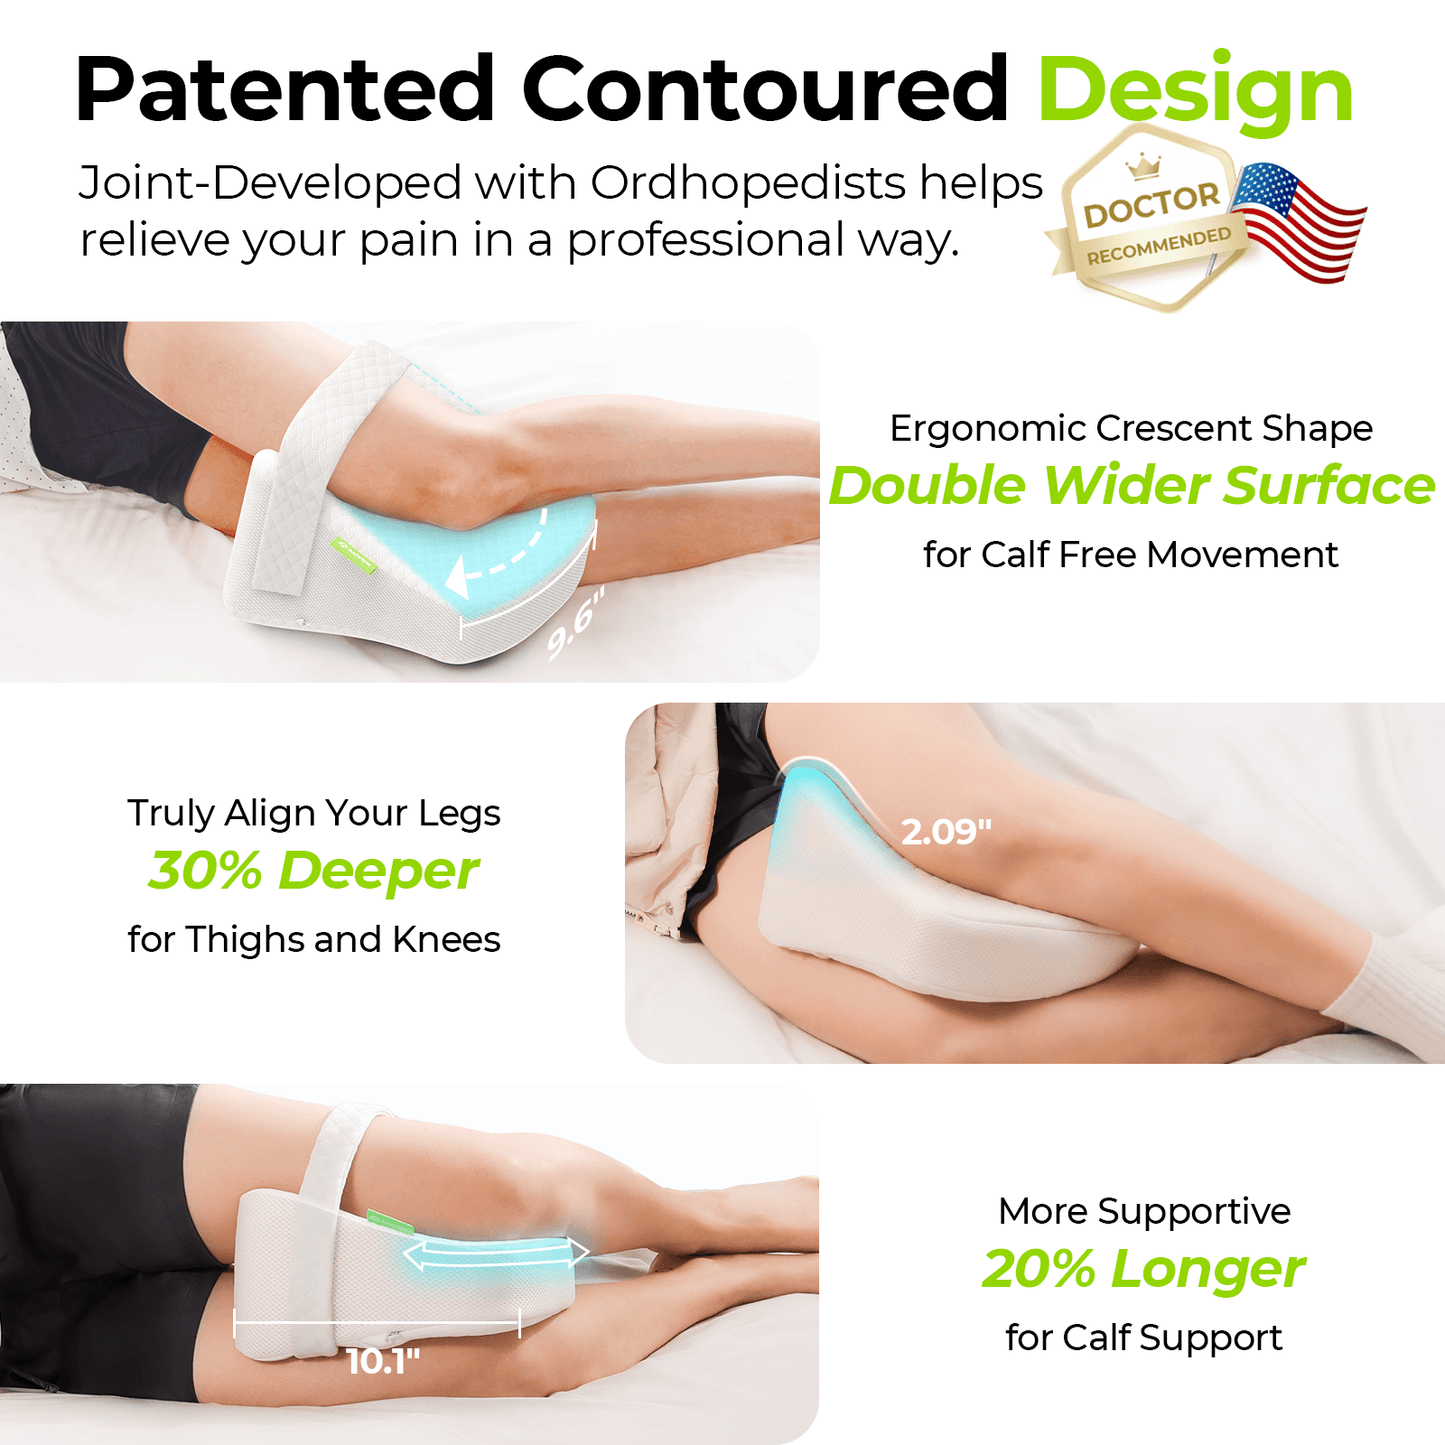 Knee Pillow - Memory Foam Extra Large - Hip & Knee Alignment Support